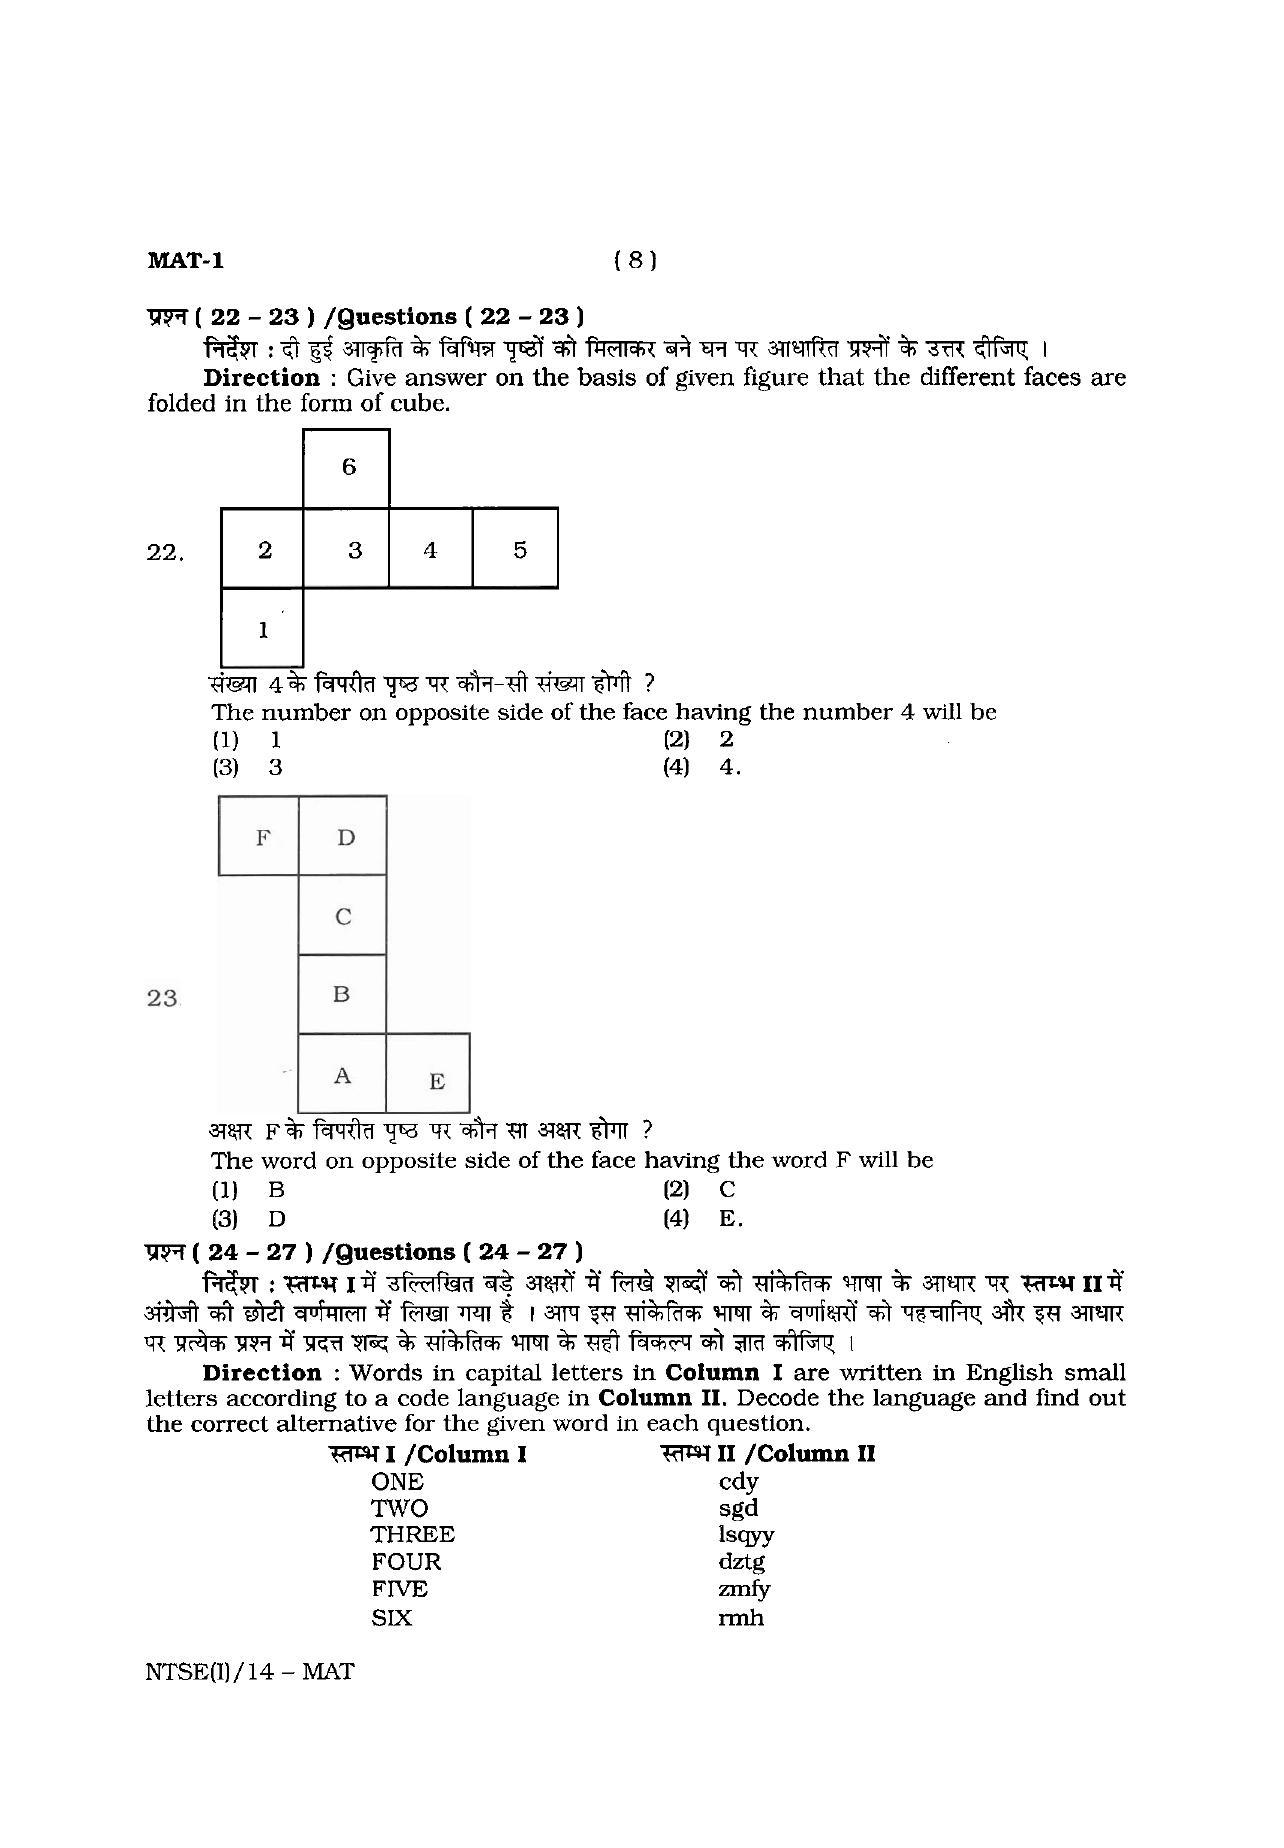 NTSE 2014 (Stage II) MAT Question Paper - Page 8